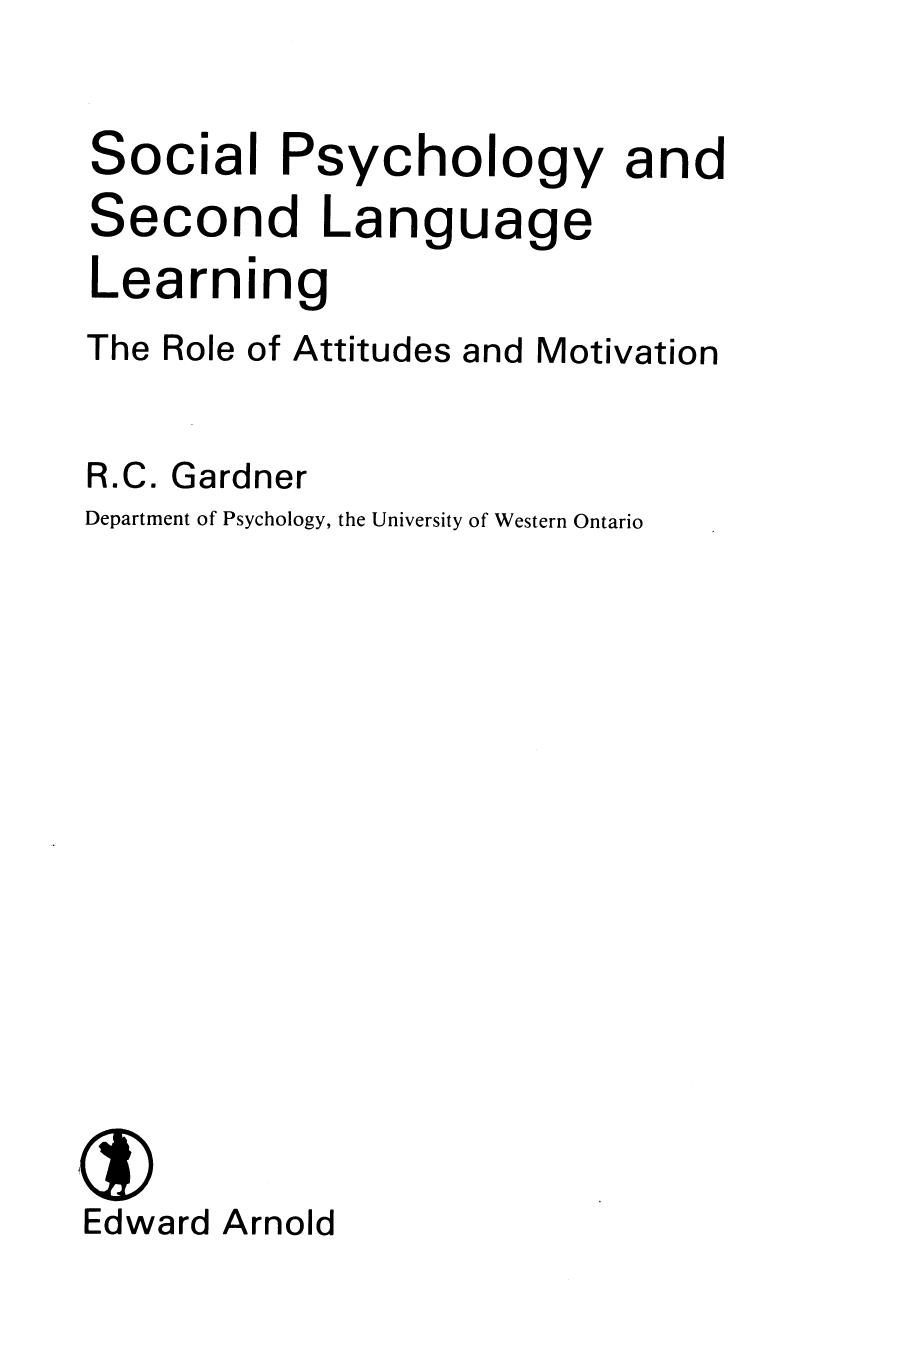 Social Psychology and Second Language Learning: The Role of Attitudes and Motivation